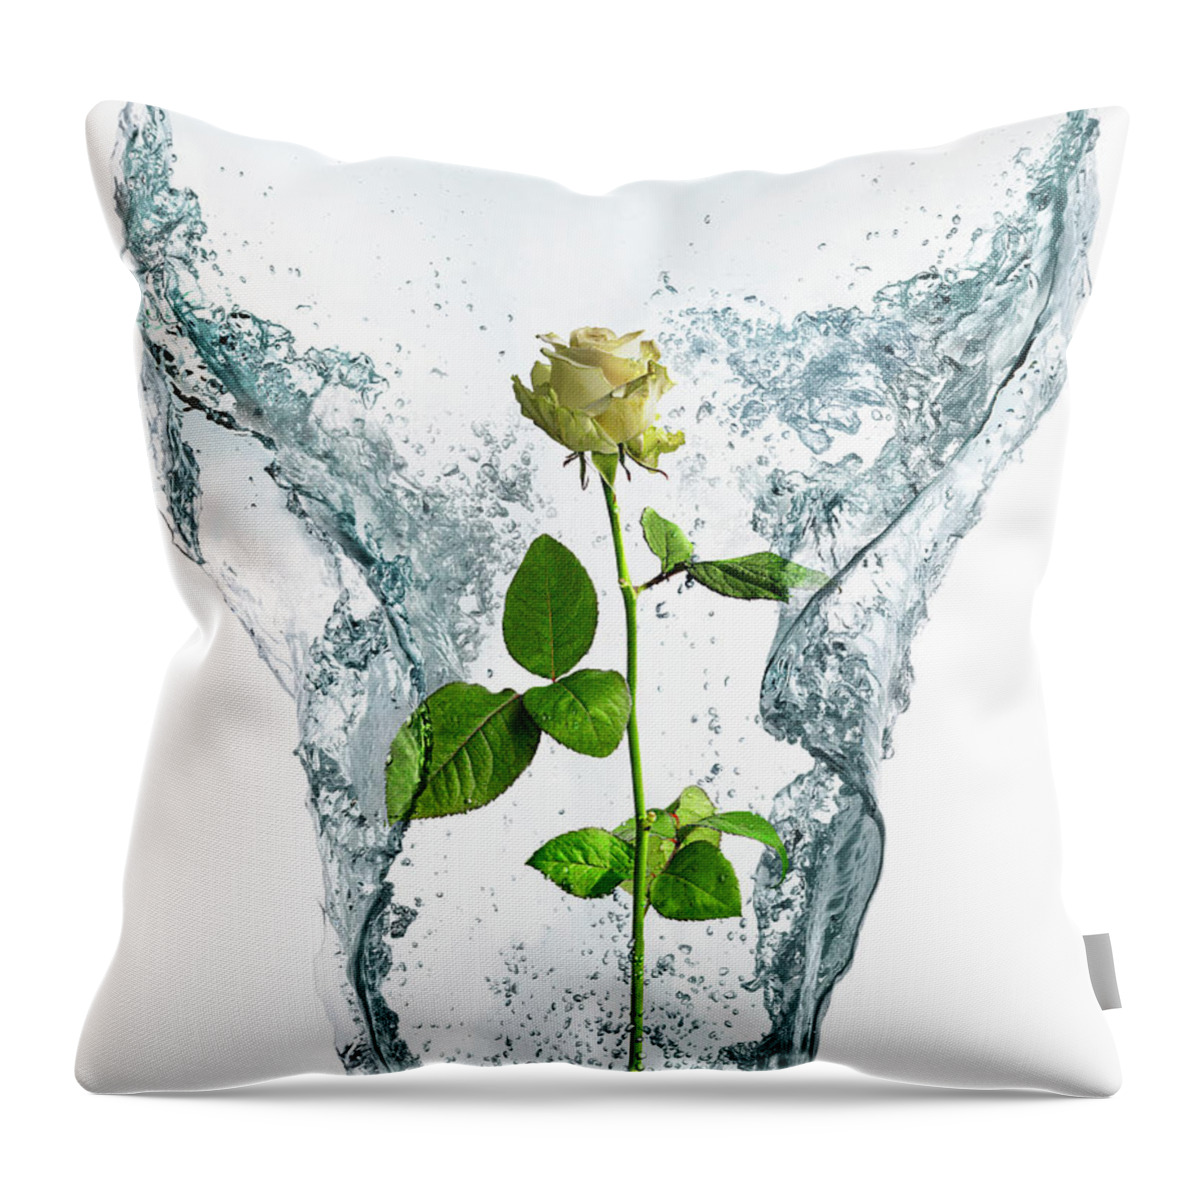 Underwater Throw Pillow featuring the photograph Rose Encased In Ice And Water by Gandee Vasan